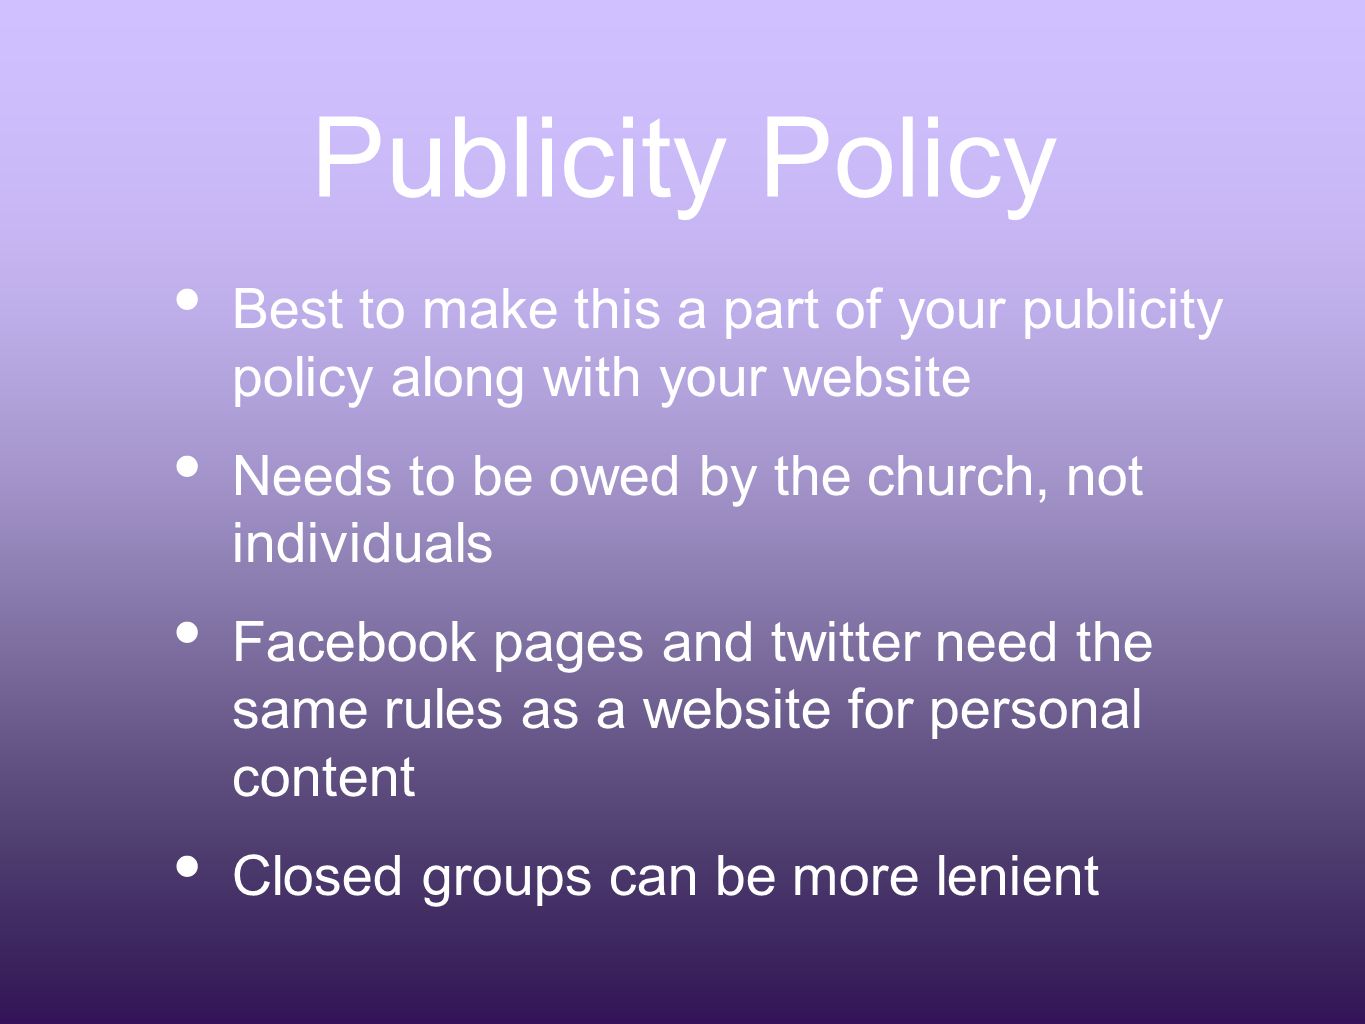 Publicity Policy Best to make this a part of your publicity policy along with your website Needs to be owed by the church, not individuals Facebook pages and twitter need the same rules as a website for personal content Closed groups can be more lenient